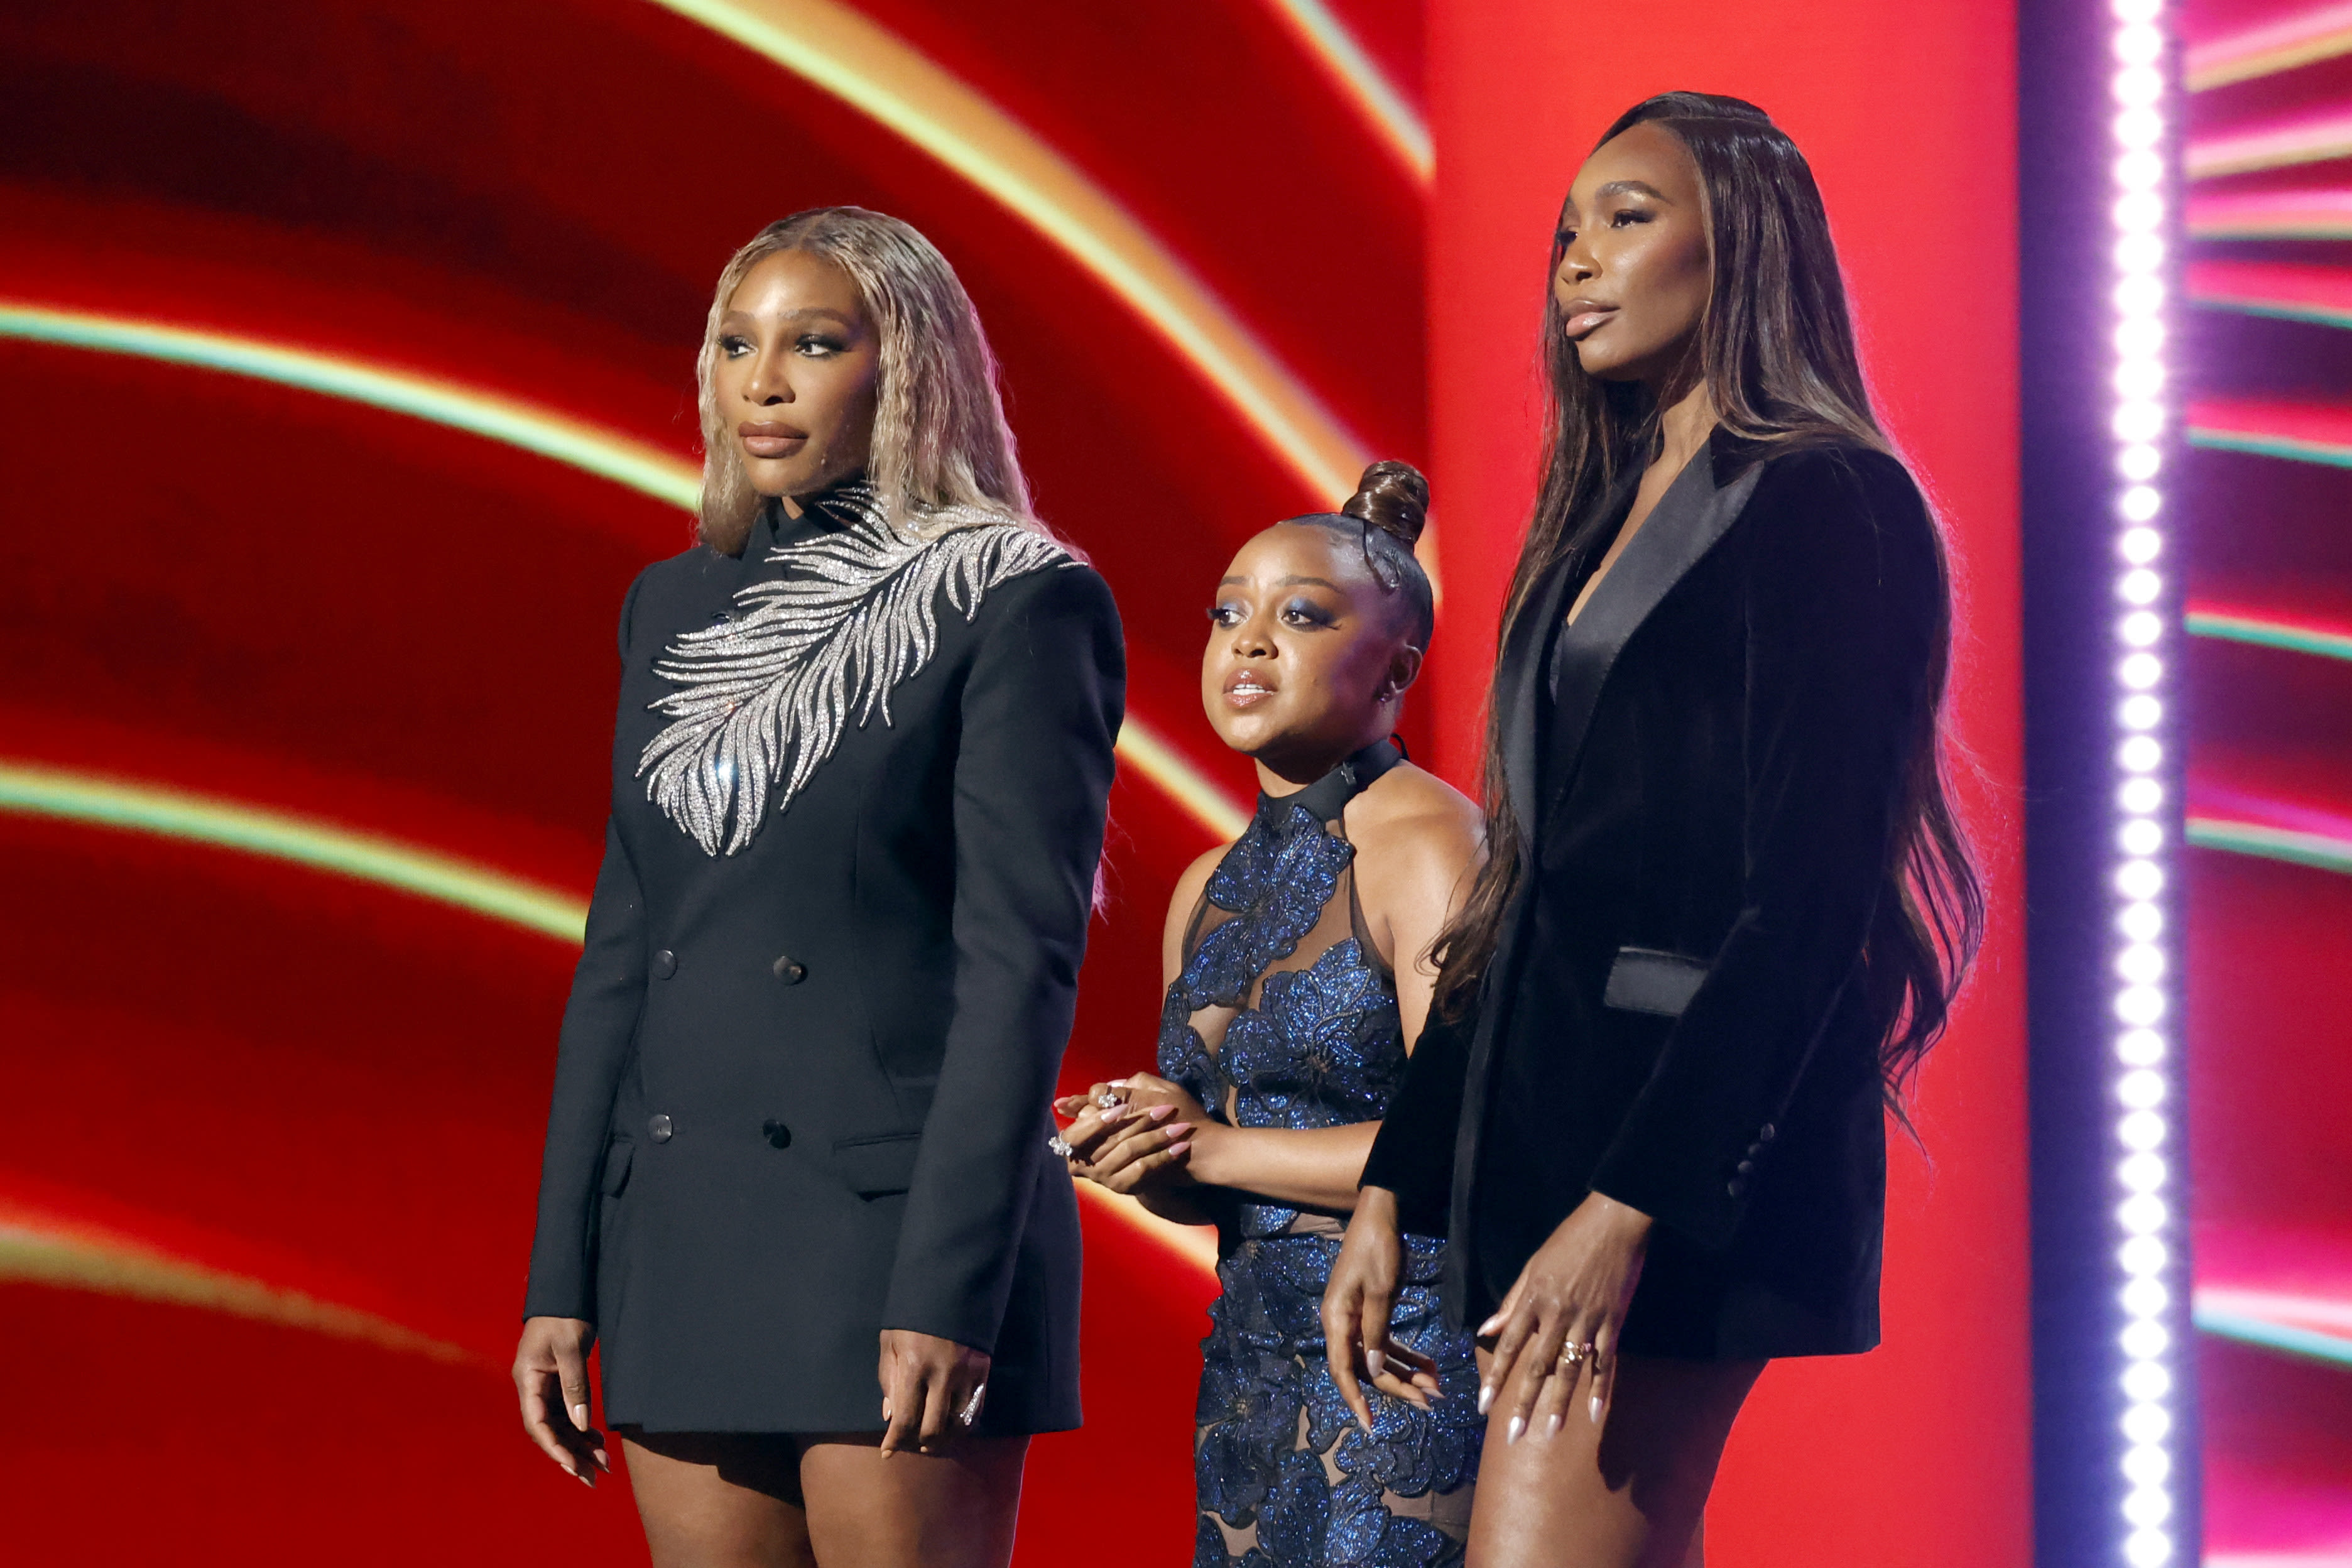 'Except you, Harrison Butker. We don't need you': Serena Williams' ESPYs quip goes viral